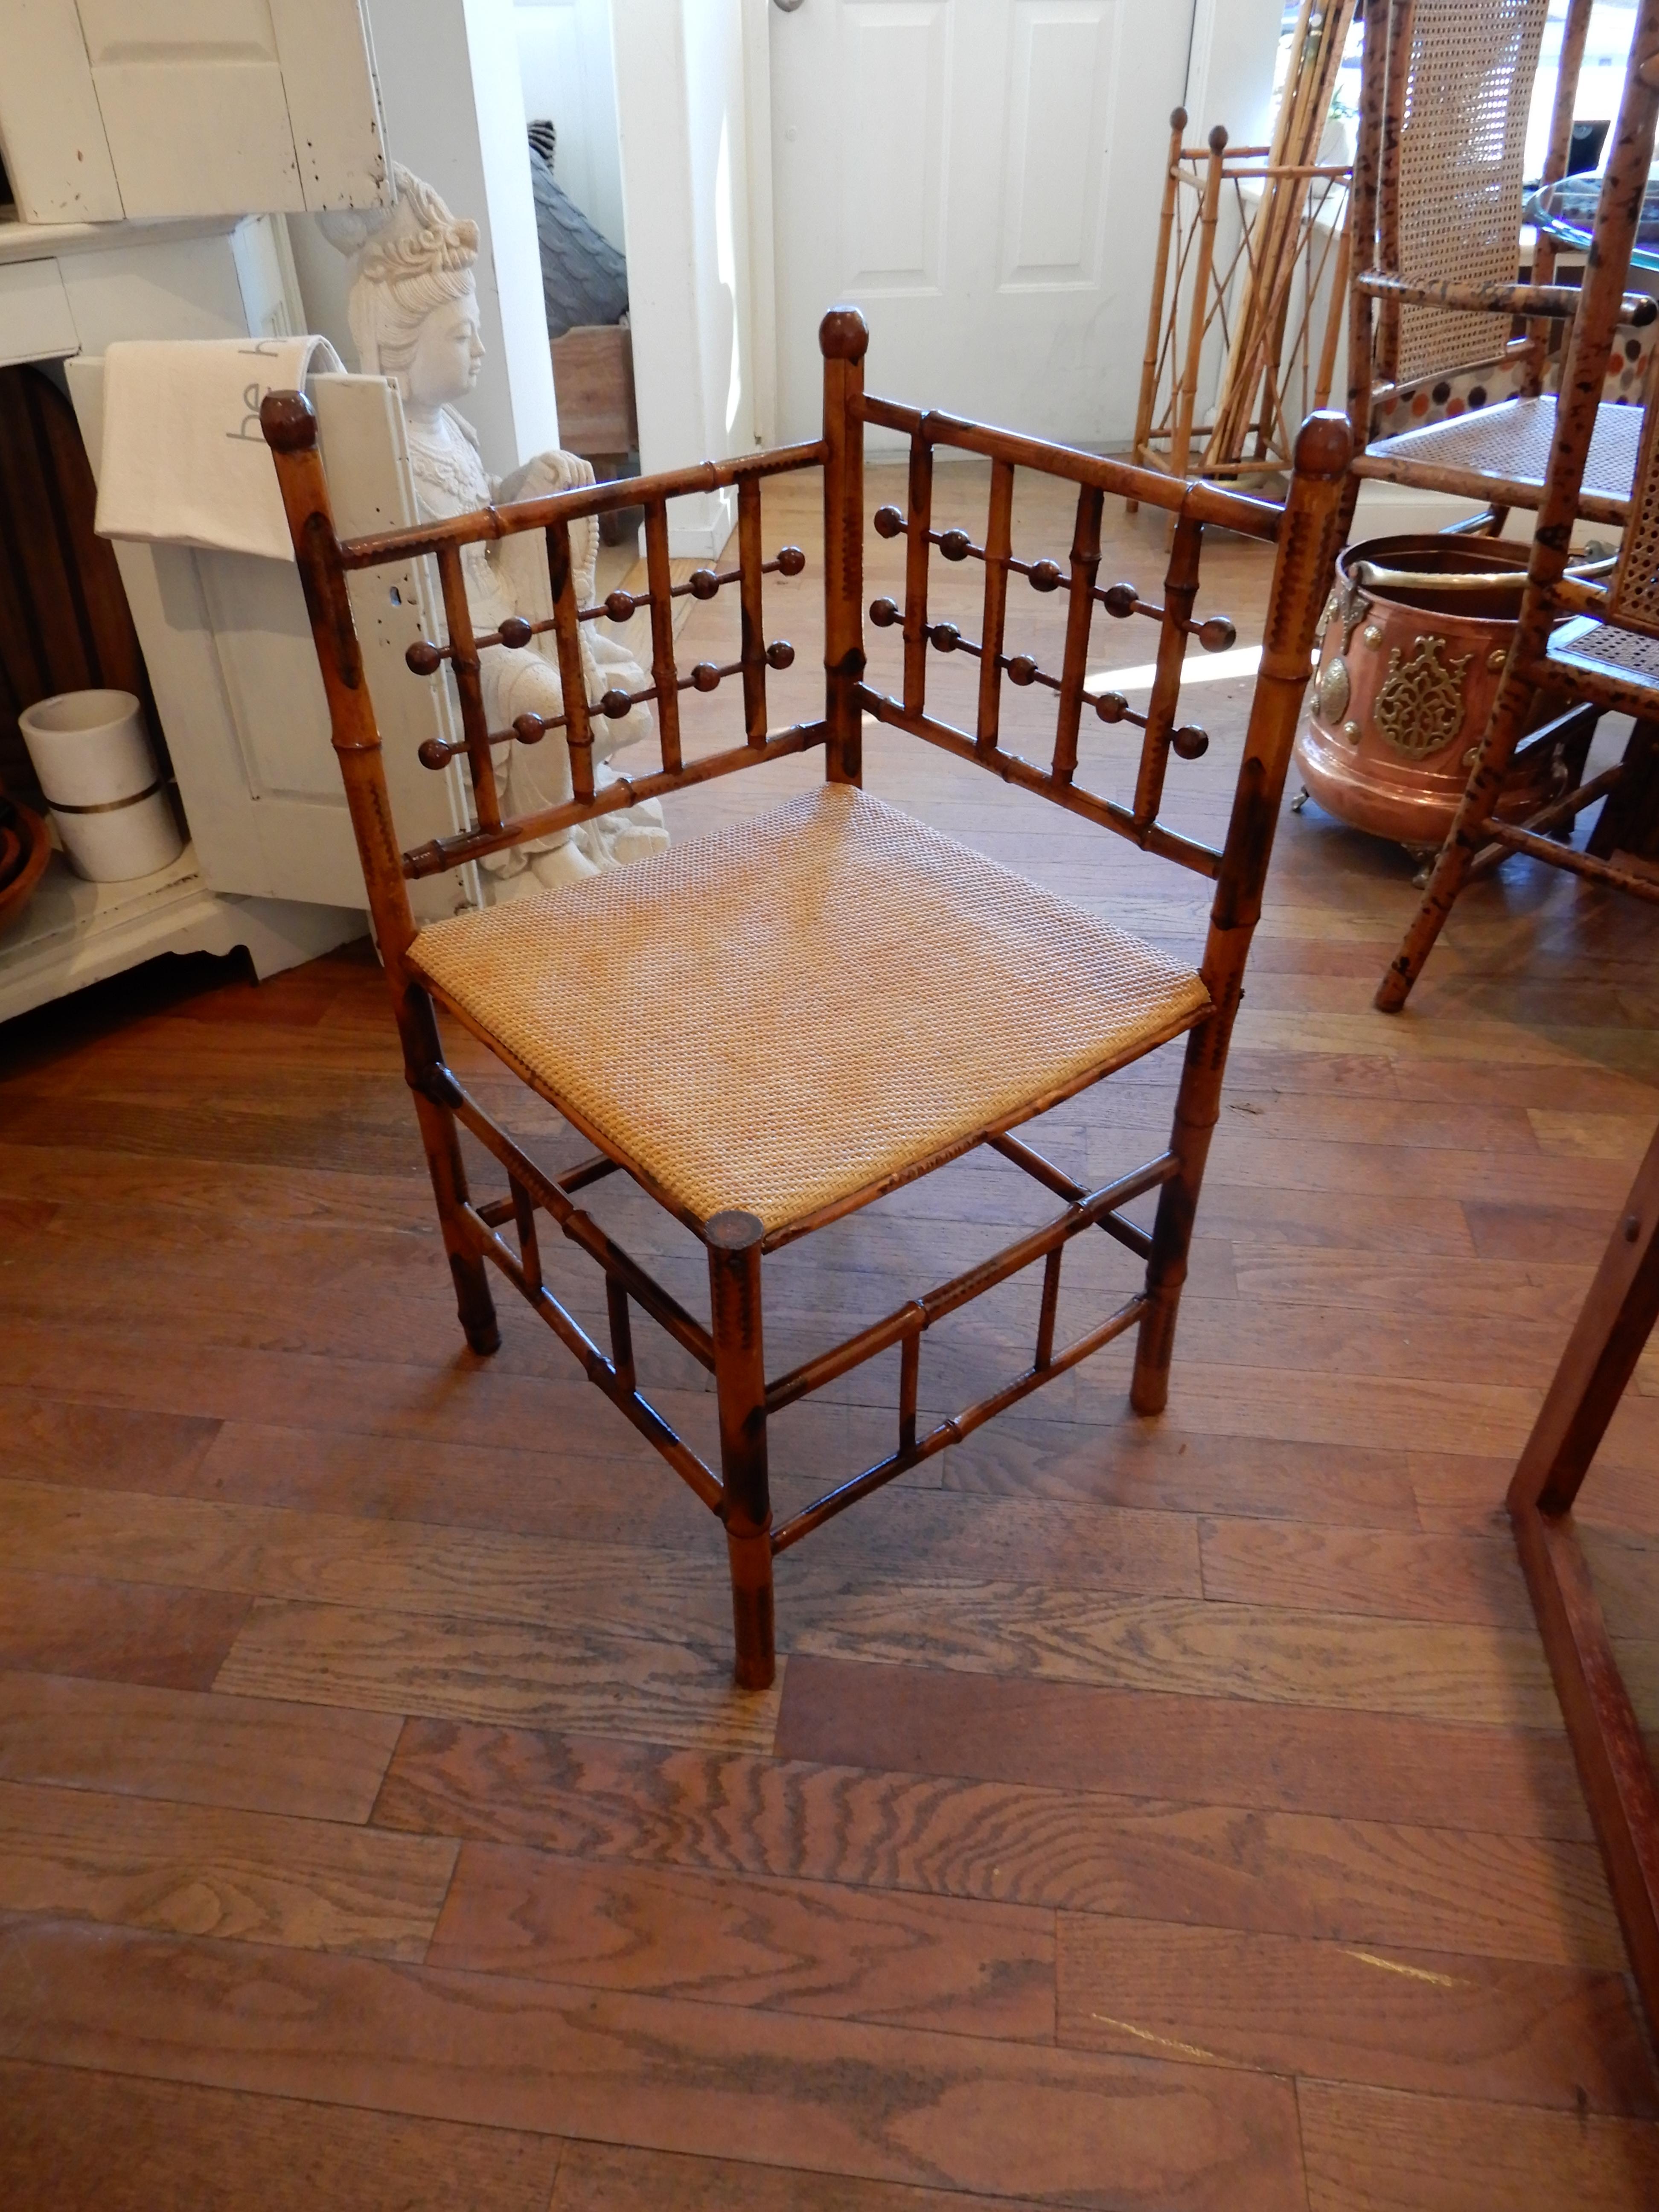 A lovely antique Americana stick and ball corner chair with a new woven mat seat, circa 1890s.
Torched bamboo finish.